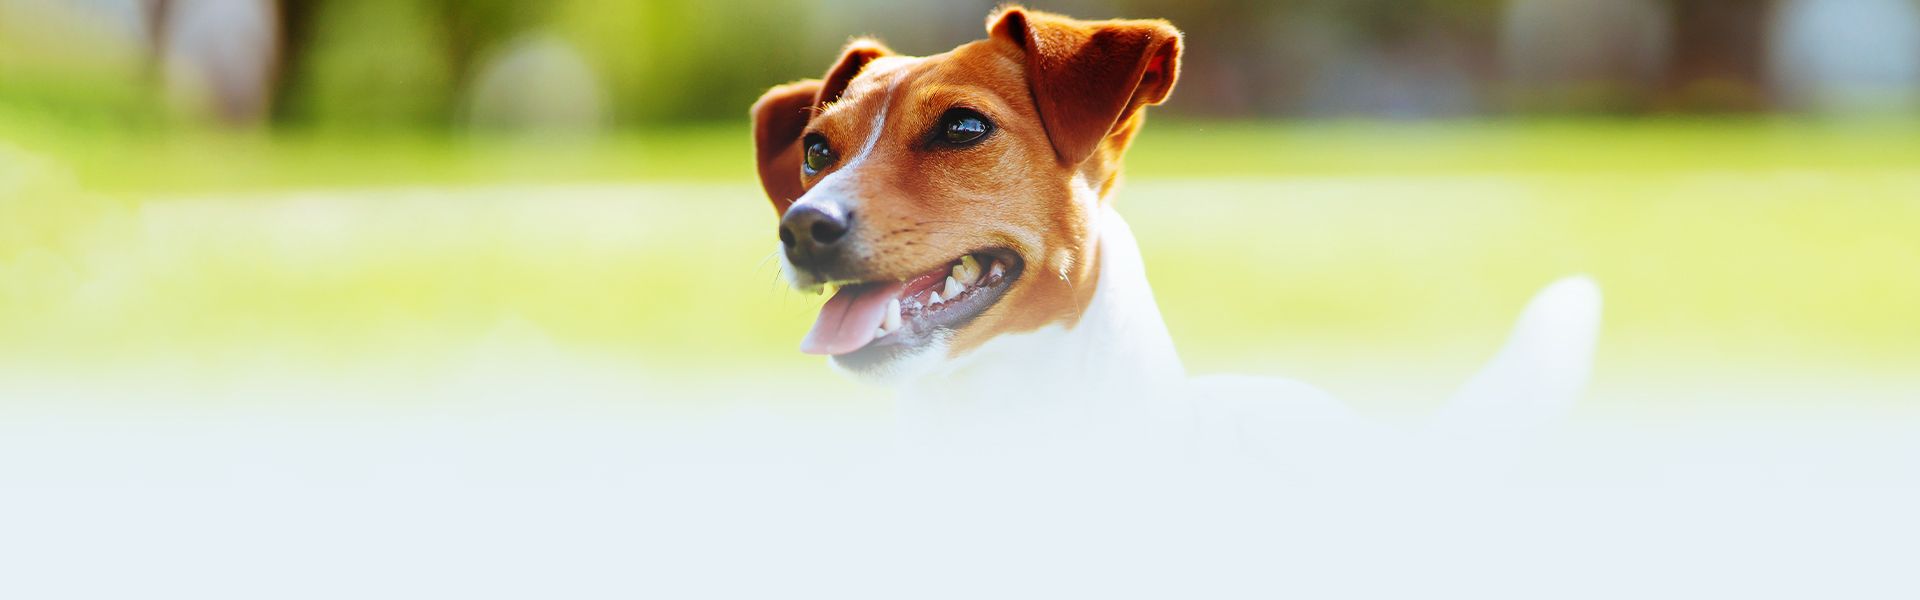 smiling jack russell dog with a blurry background